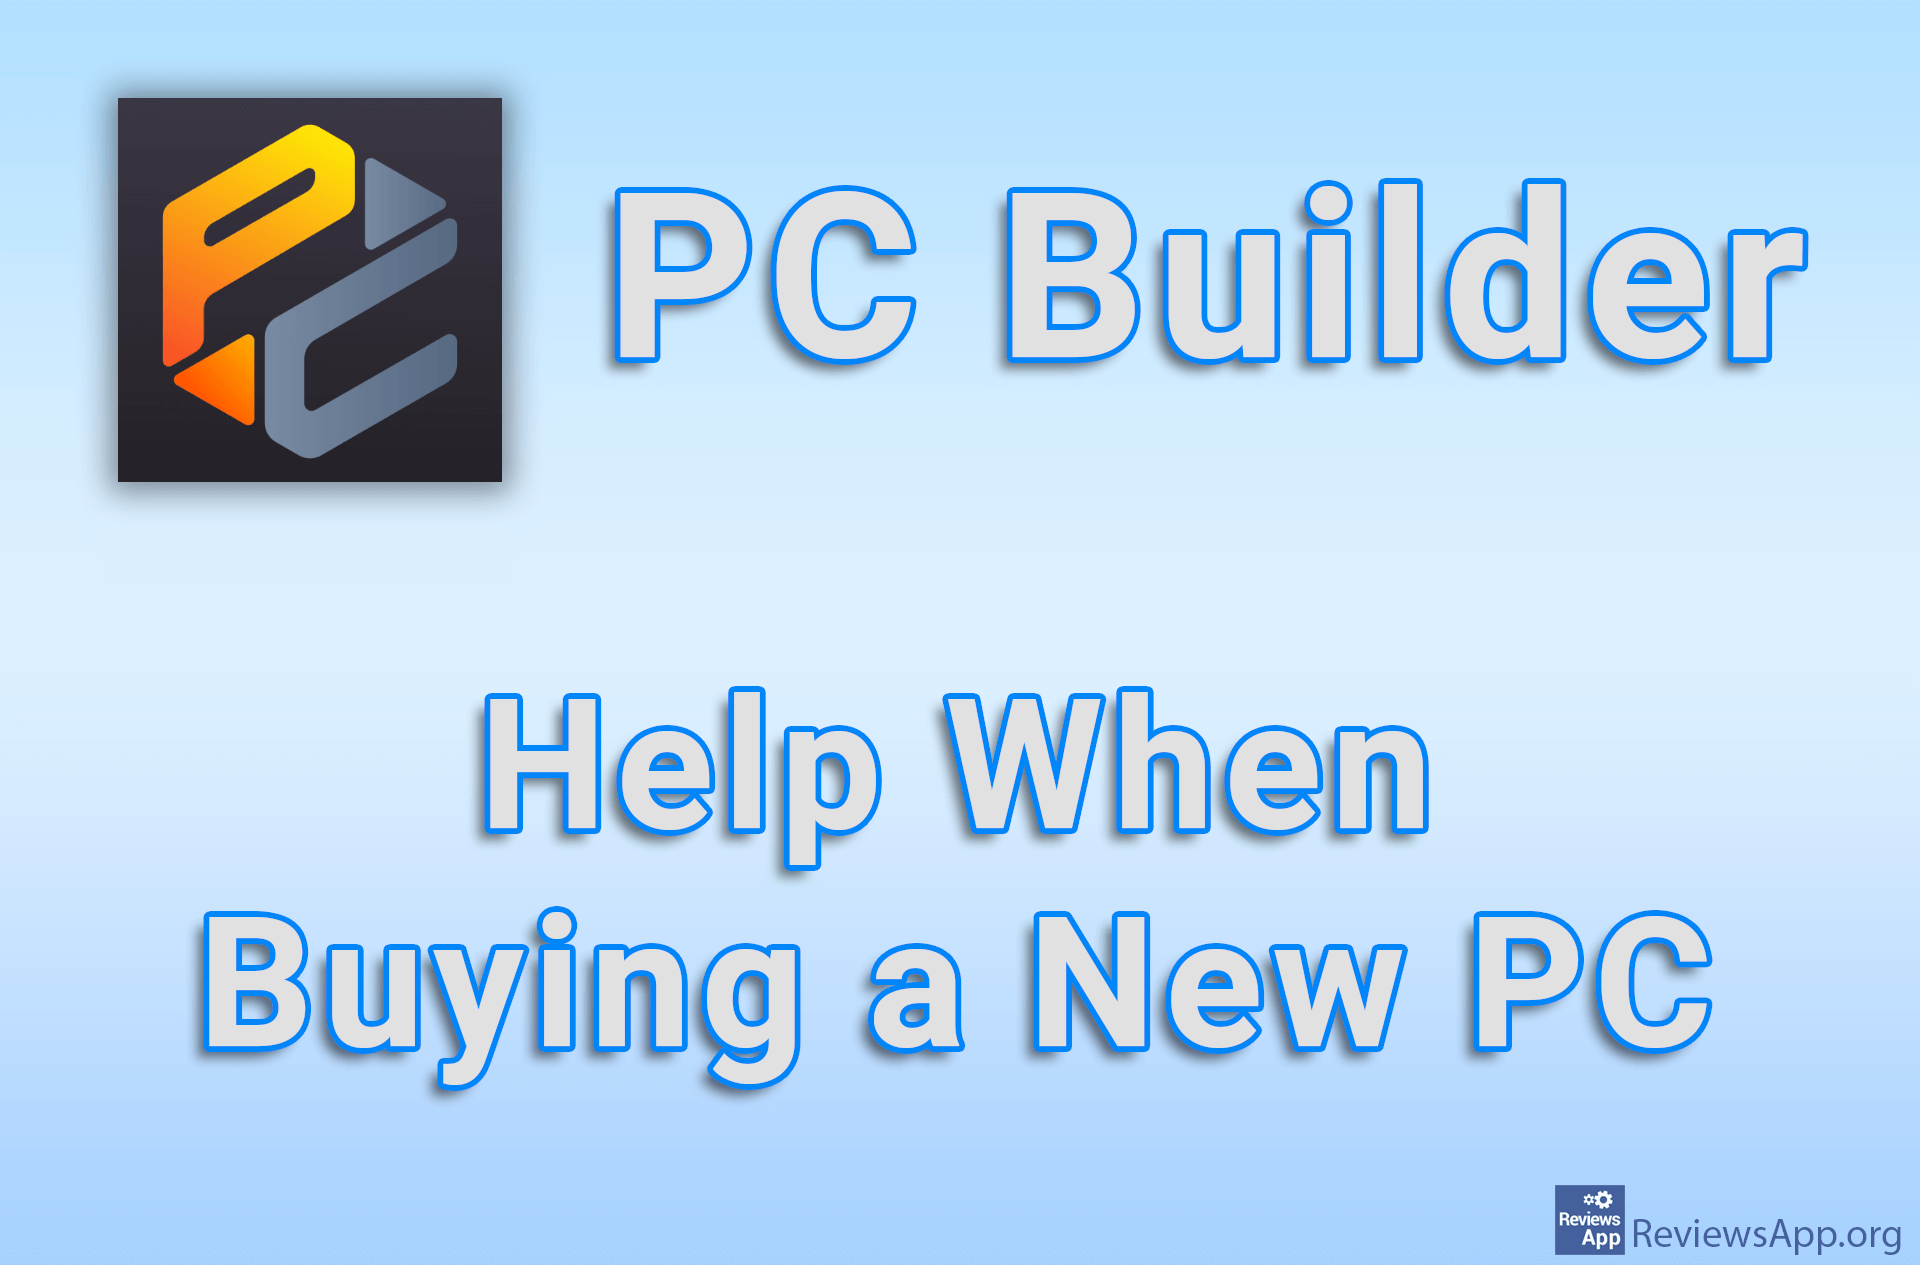 PC Builder – Help When Buying a New PC